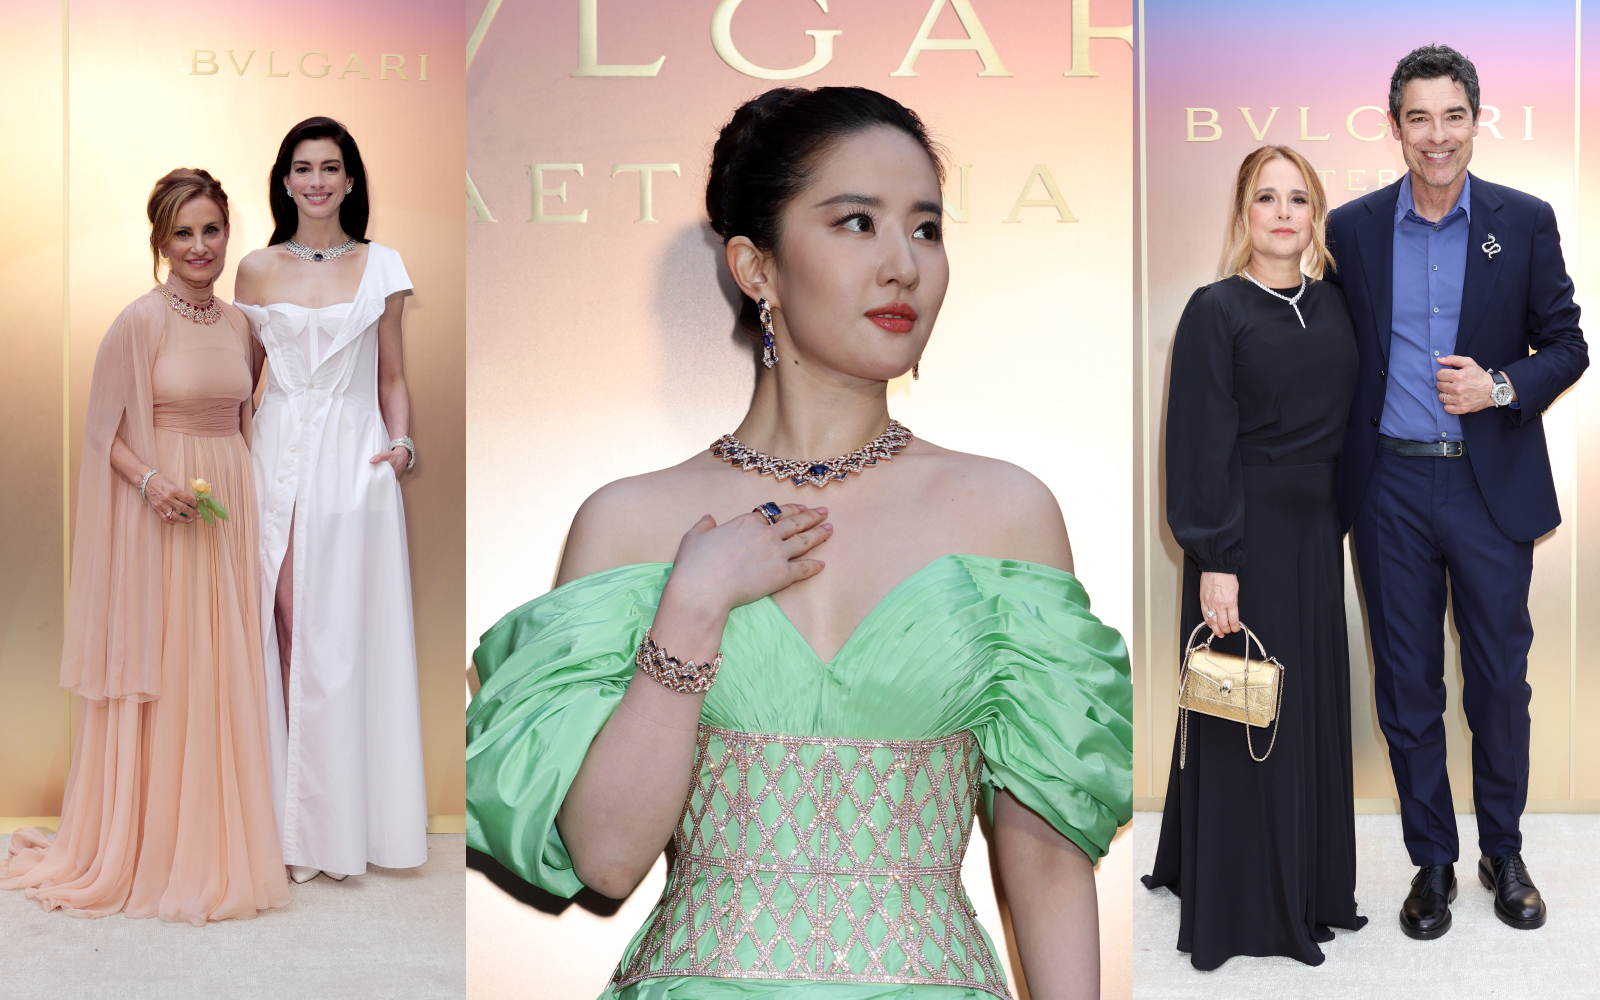 Guests attend the launch of the Bulgari Aeterna High Jewellery collection at the Terme di Diocleziano in Rome including (far left) Bulgari Jewellery Executive Creative Director Lucia Silvestri with actress Anne Hathaway